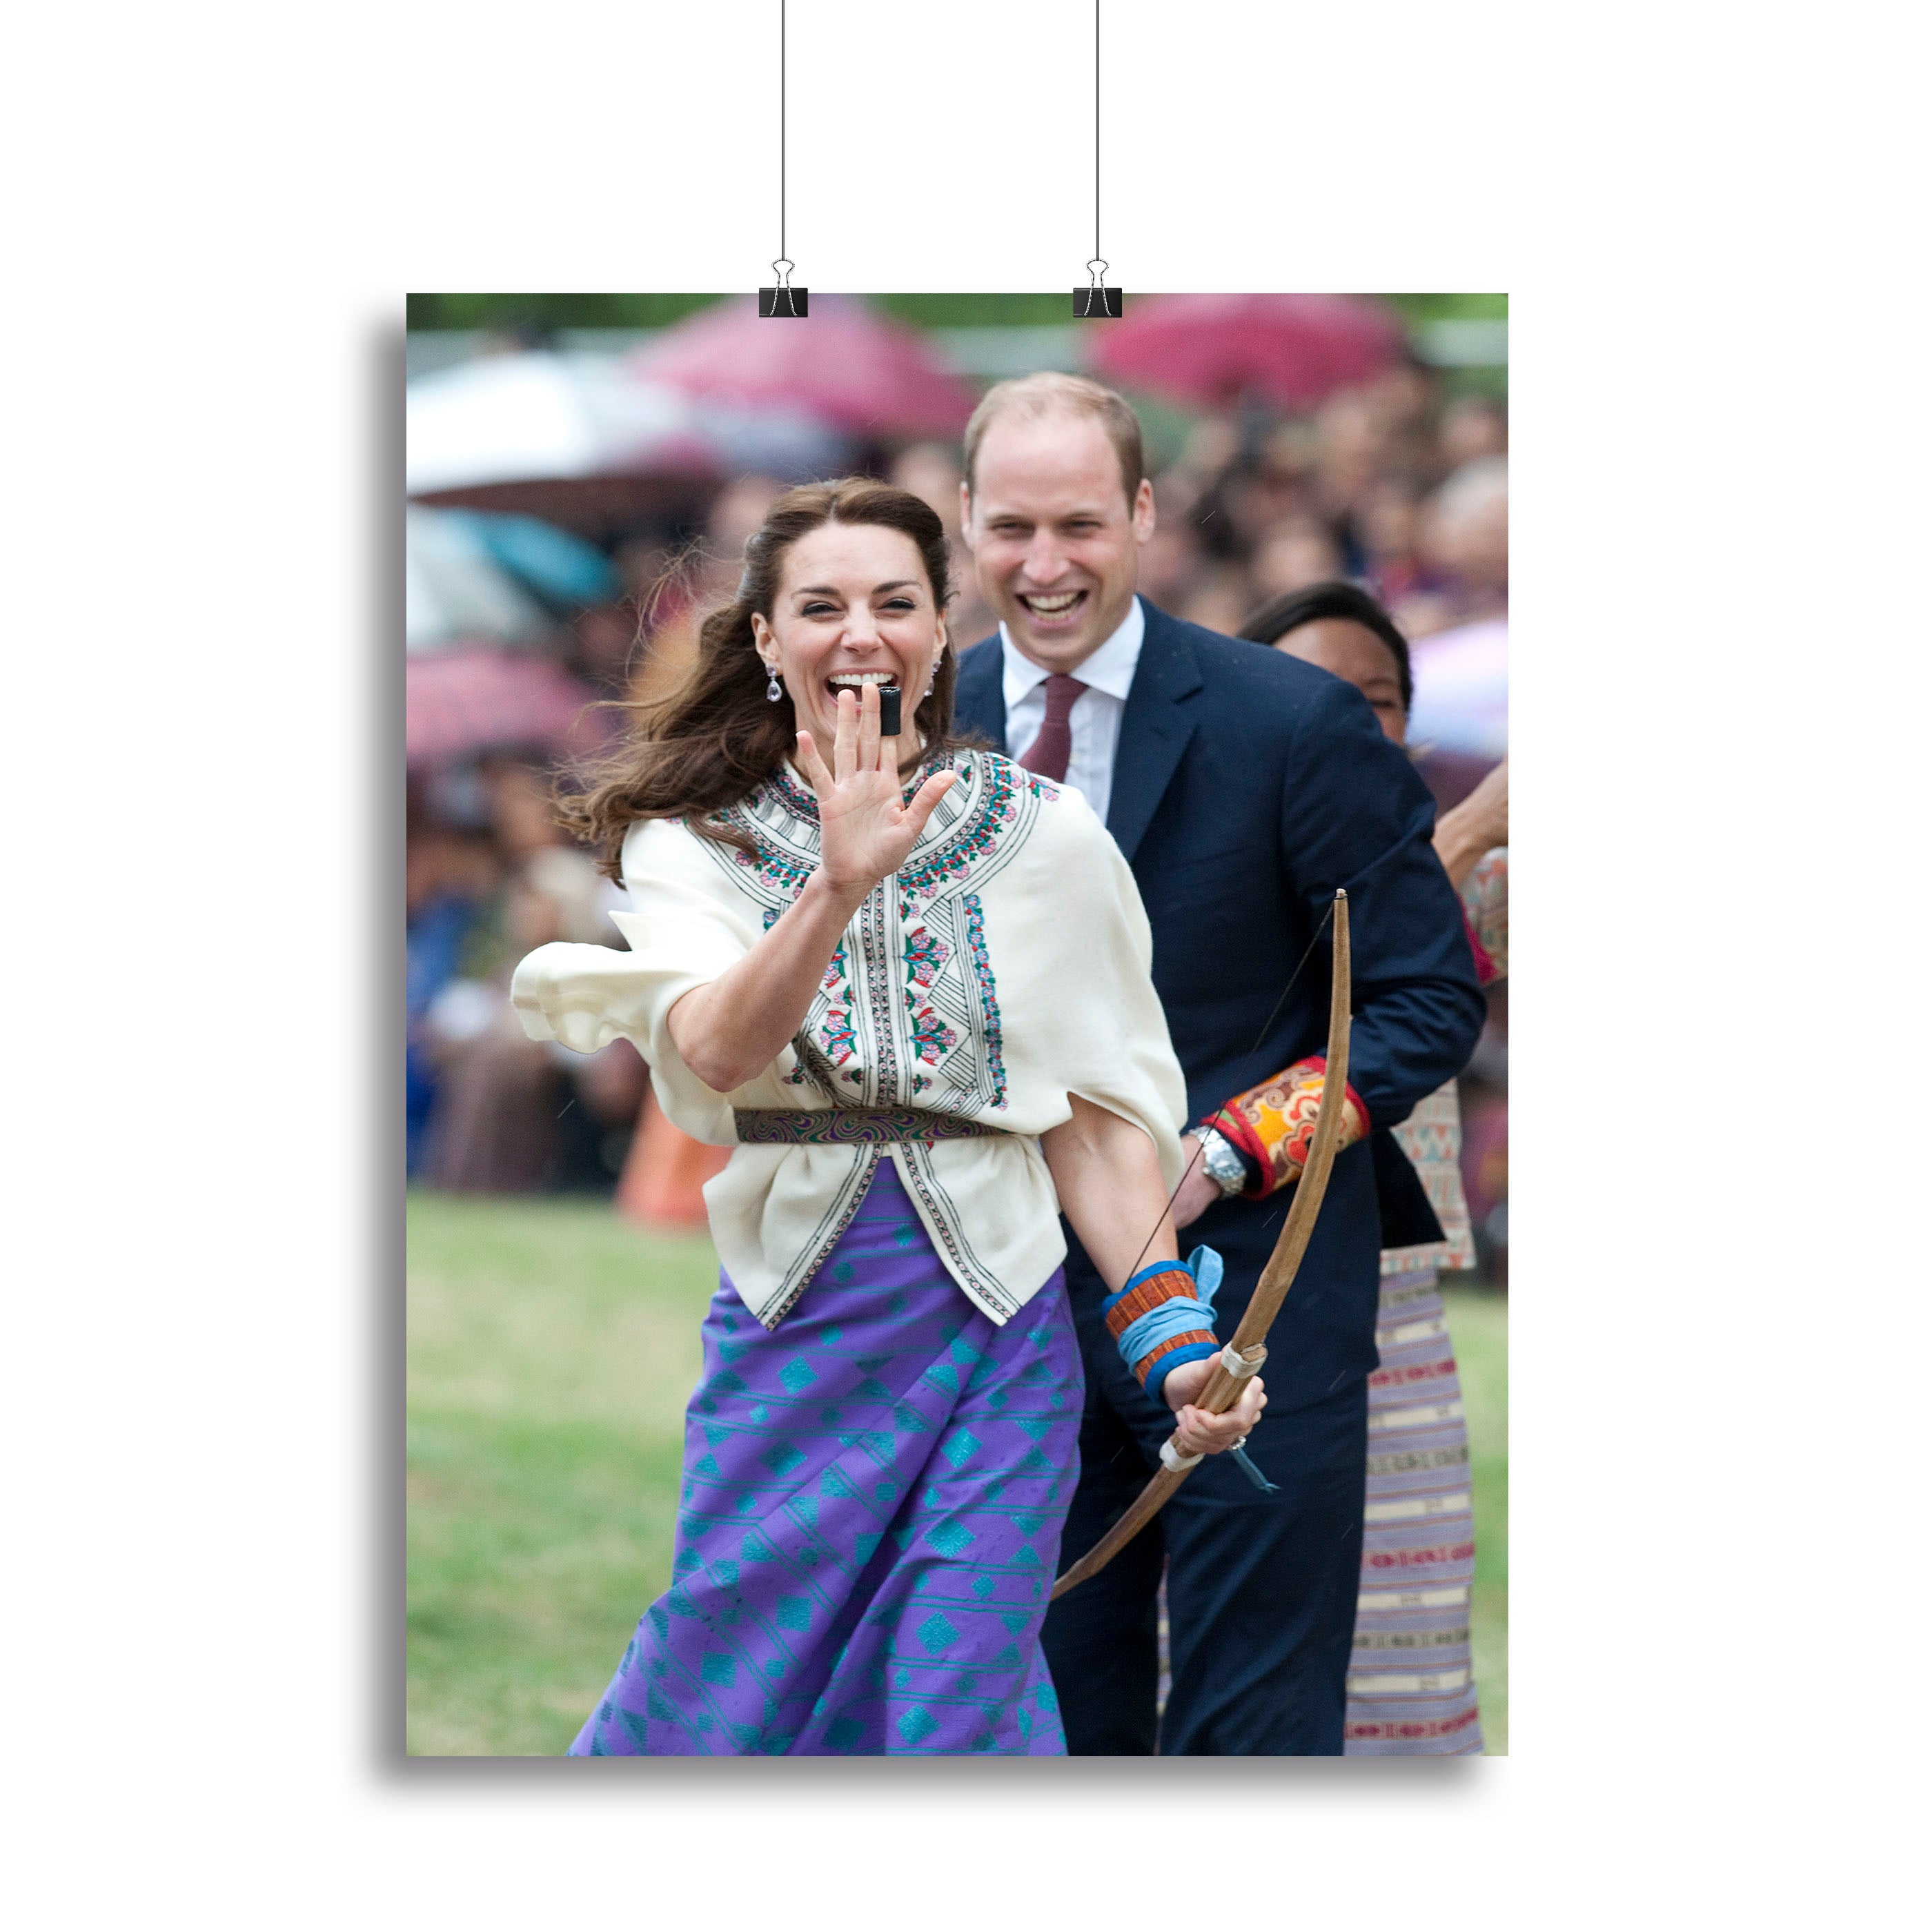 Prince William and Kate laughing trying archery in Bhutan Canvas Print or Poster - Canvas Art Rocks - 2